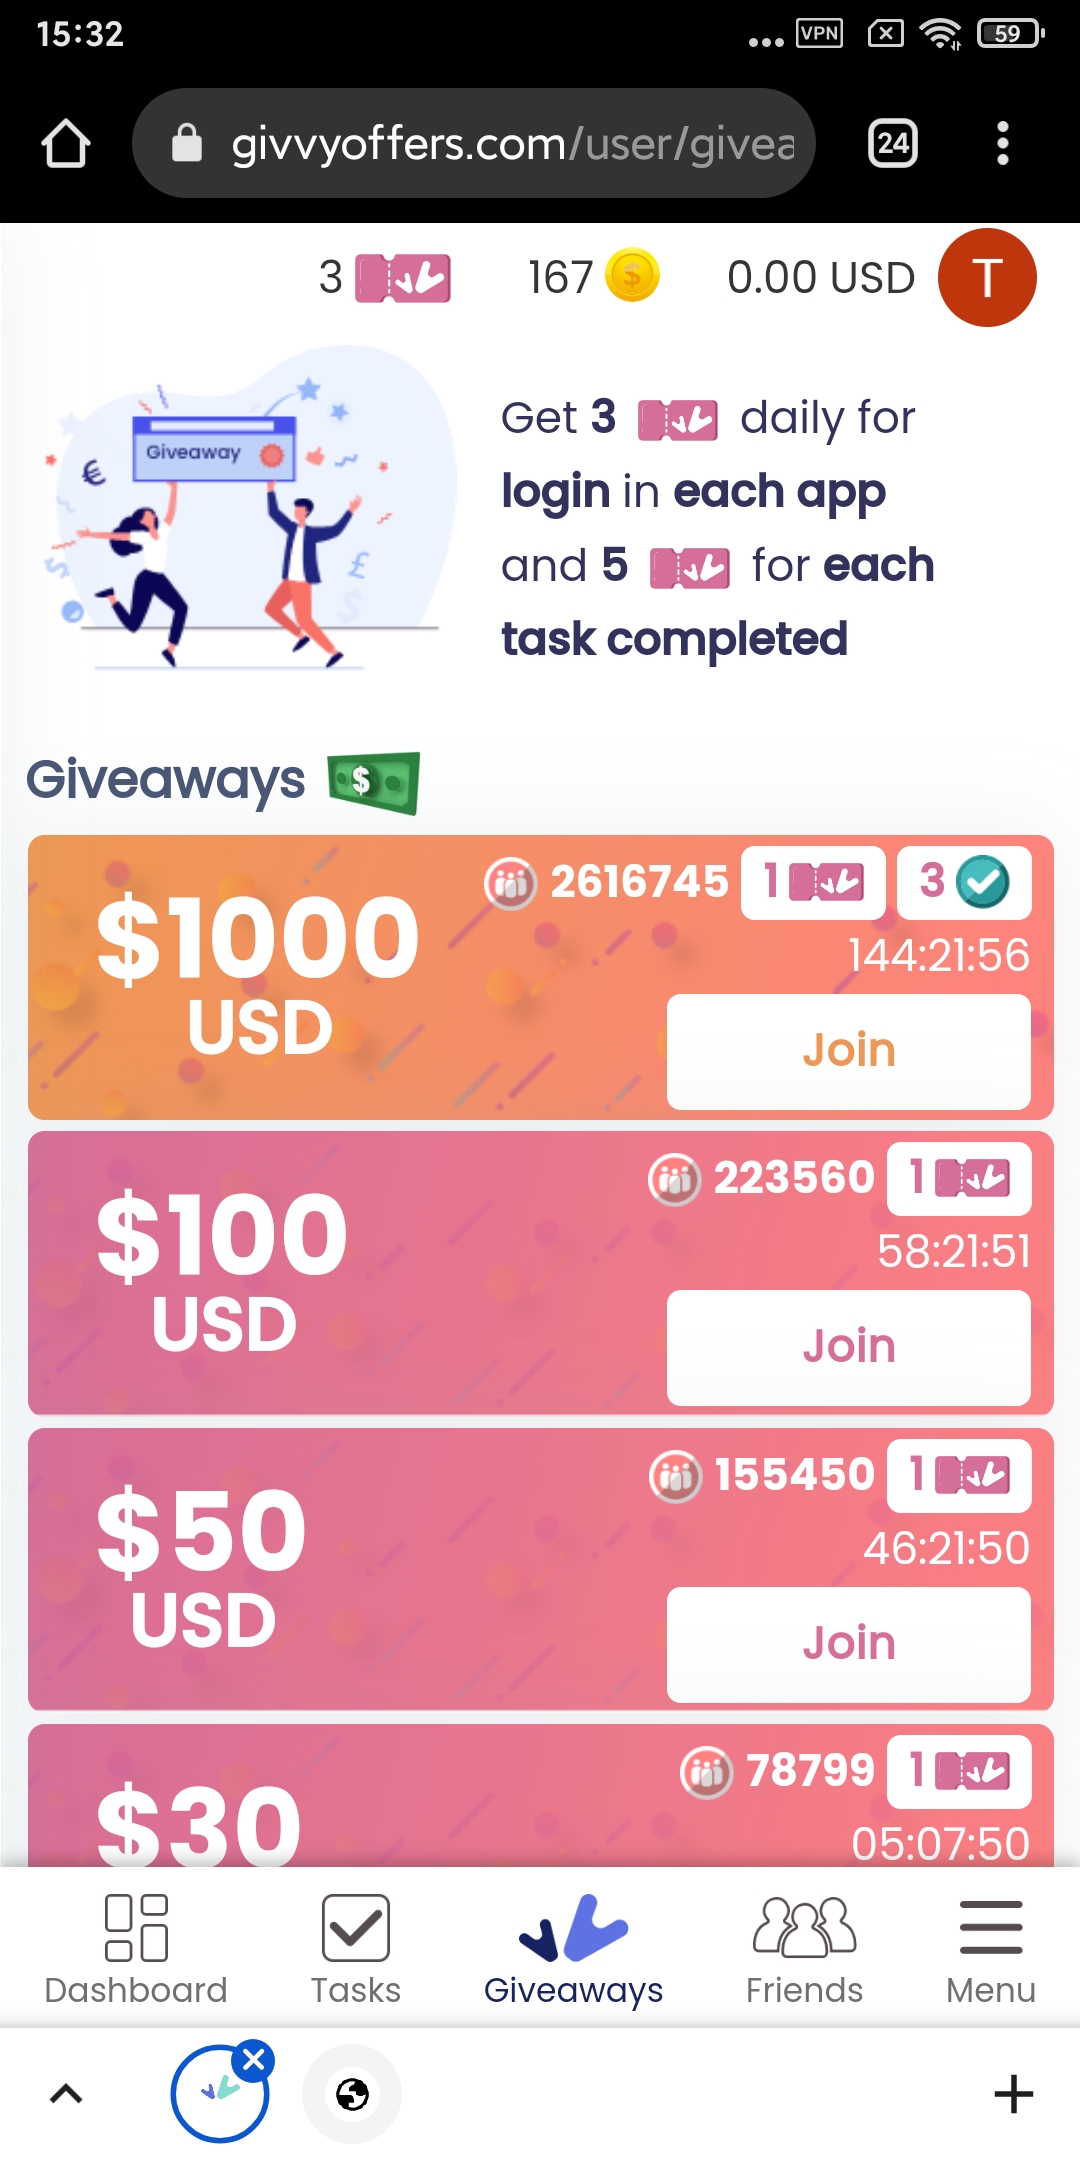 Make money and earn rewards with Givvy!